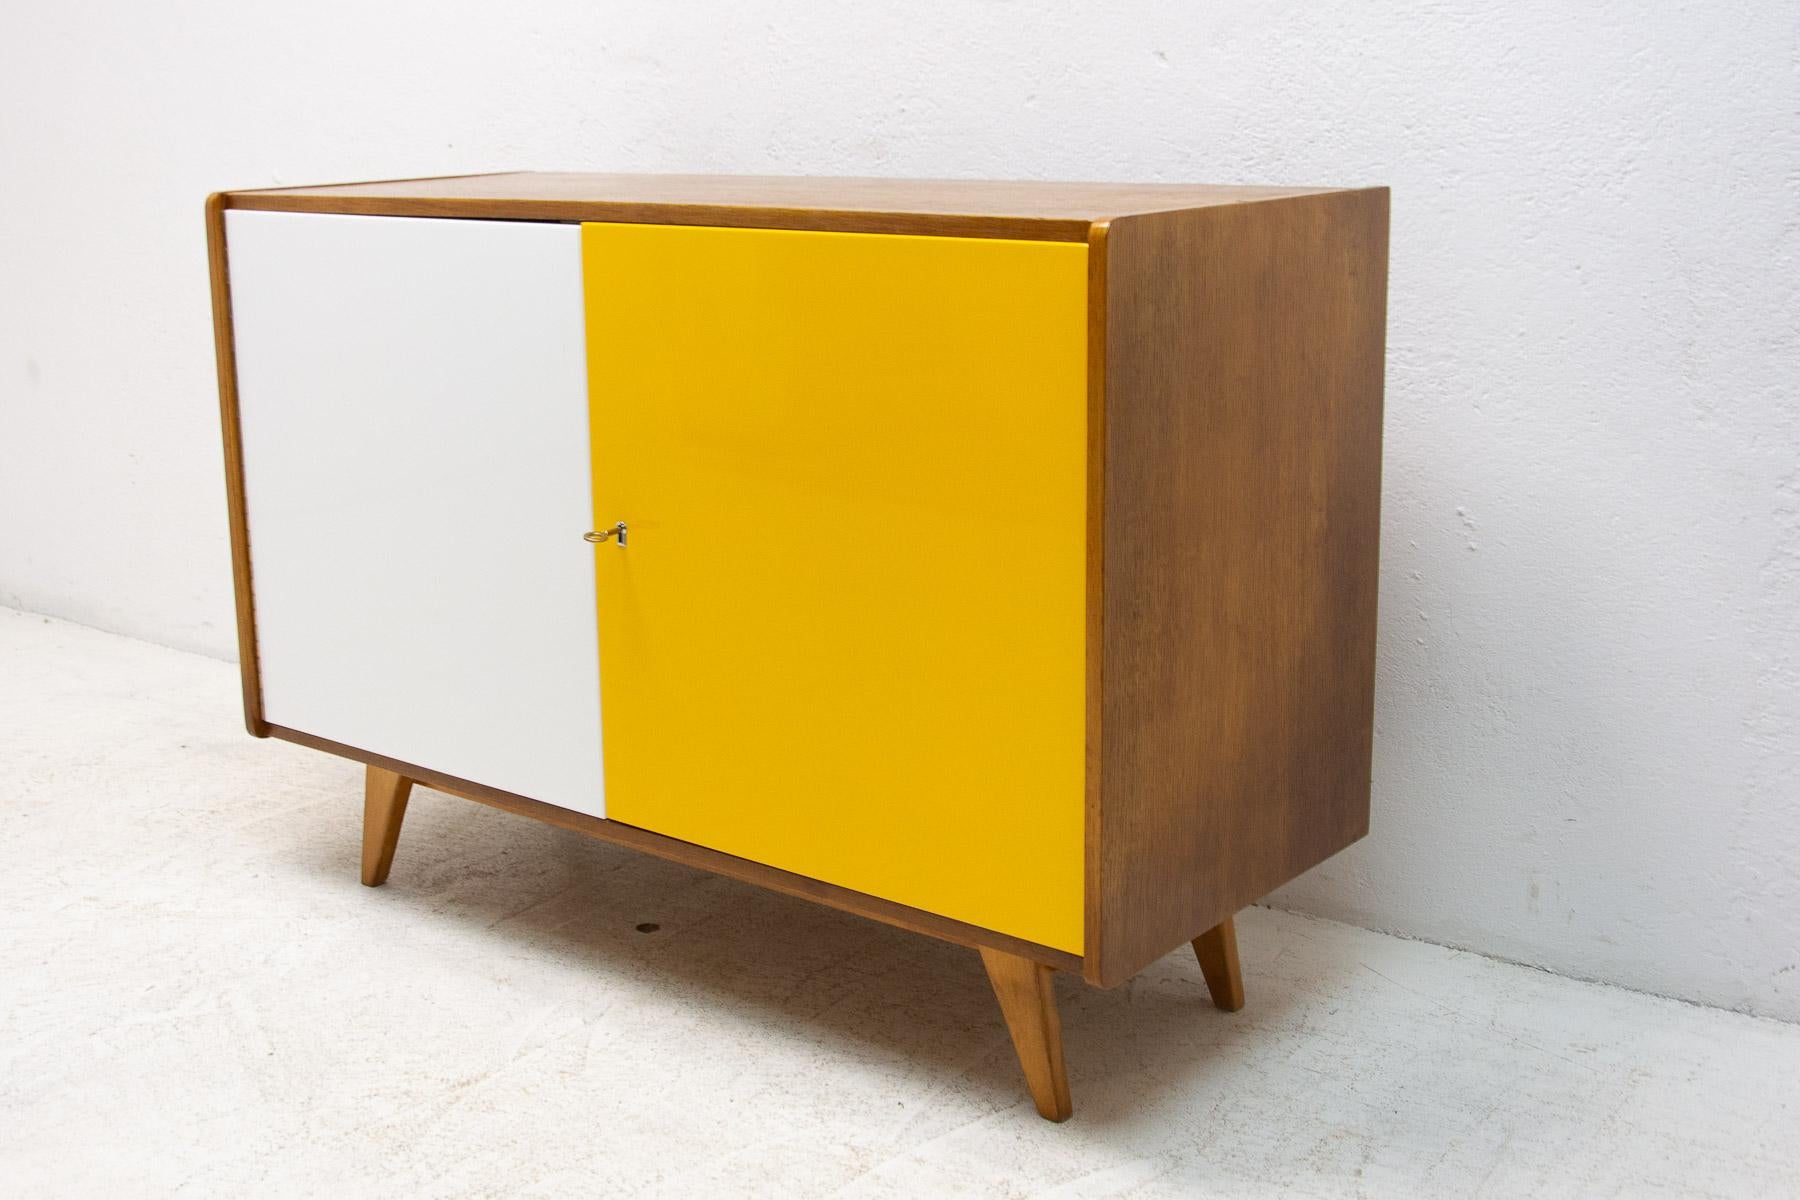 Mid century sideboard-cabinet, catalogue No. U-450, designed by Jiri Jiroutek. It´s made of beechwood, veneer, plywood and laminate. In very good condition.

The cabinet comes from the famous Universal series (U-450), which was designed in 1958